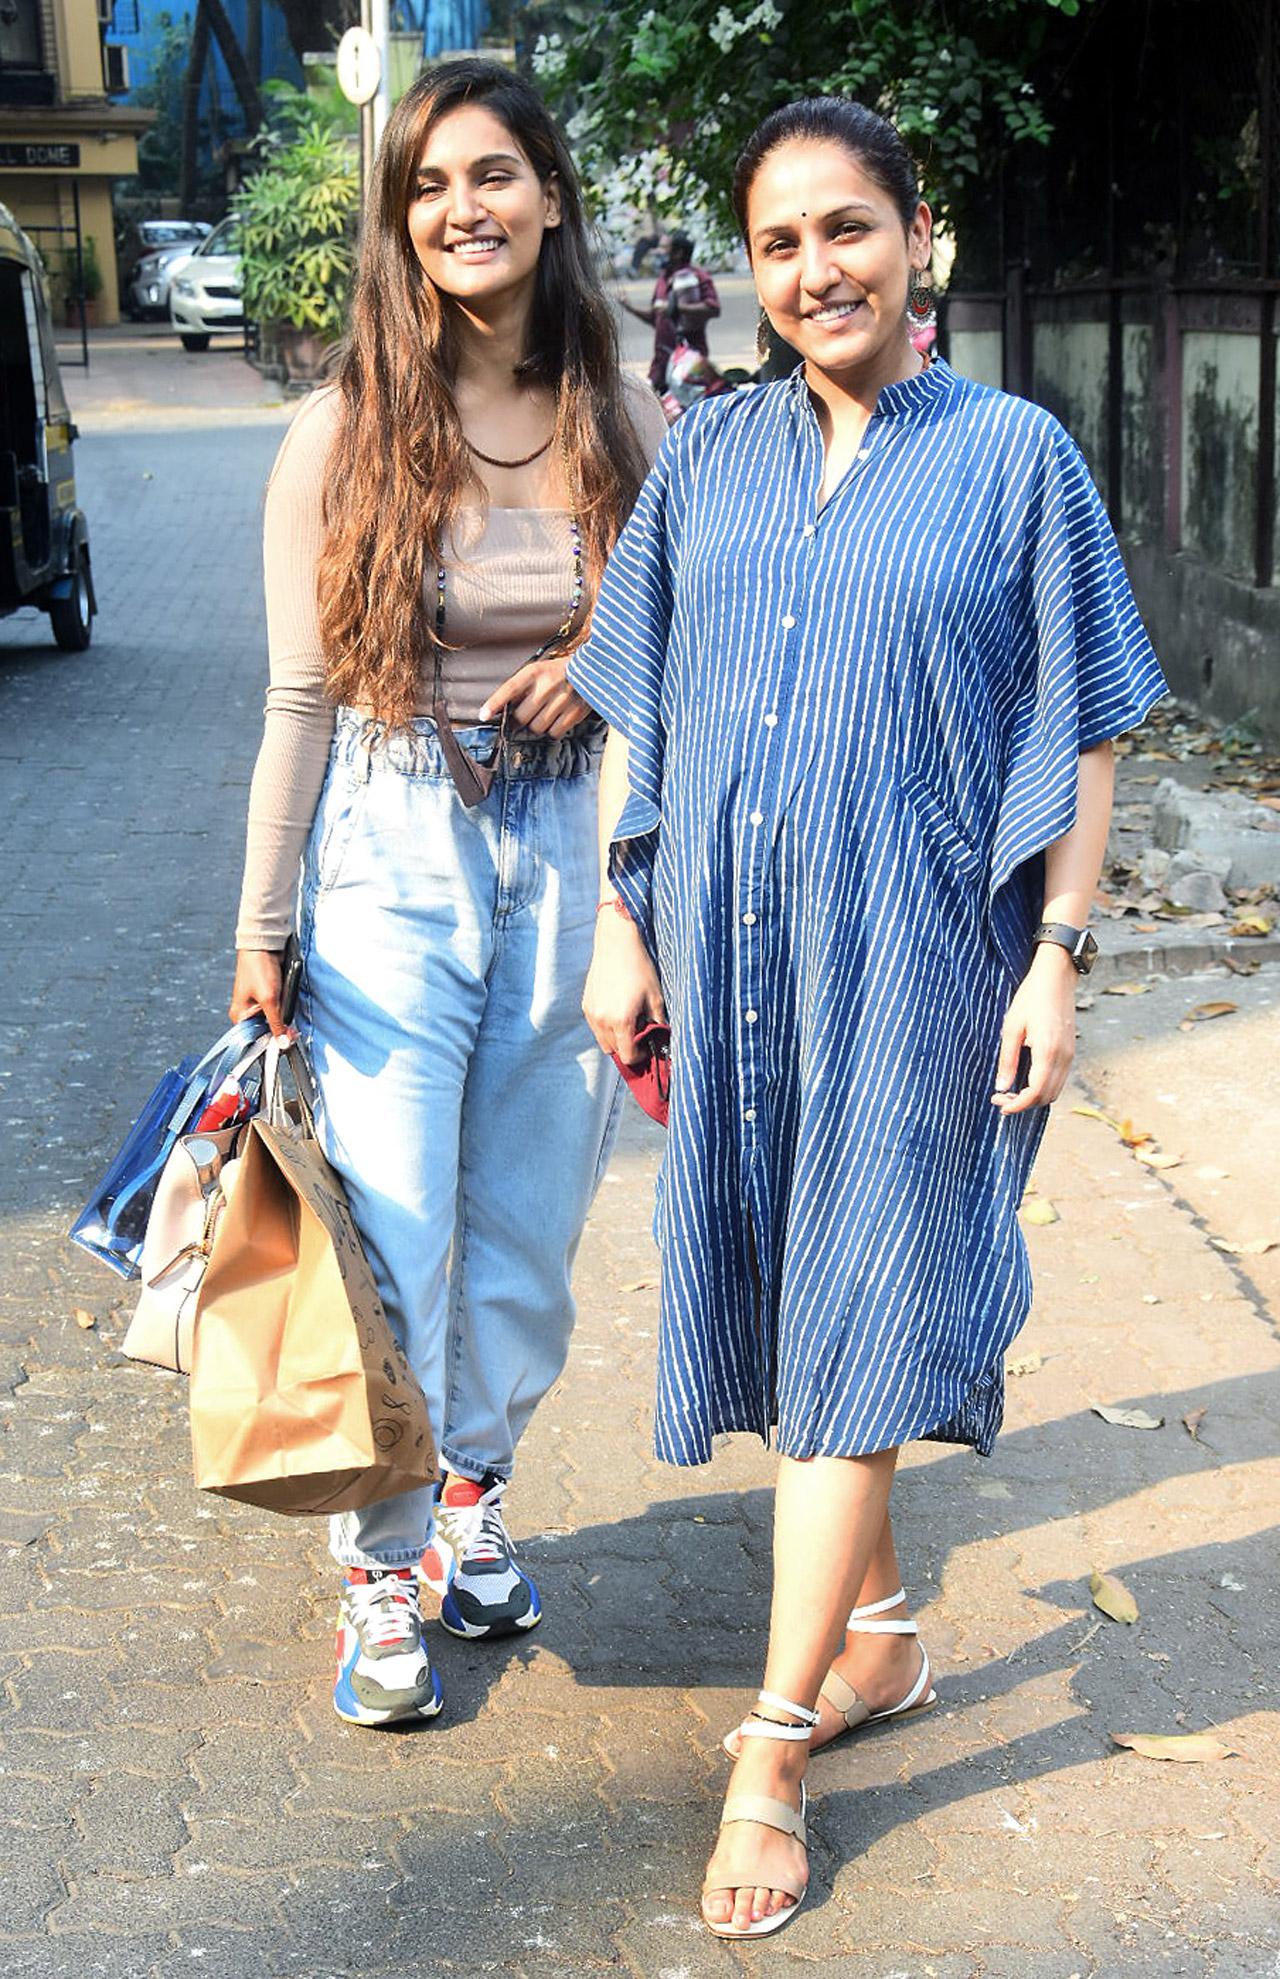 Singer Neeti Mohan, who is expecting her first child with husband, actor Nihaar Pandya, was clicked with her sister, Mukti Mohan in Bandra. The sister duo had stepped out for a cup of coffee, as per Mukti's Twitter post.